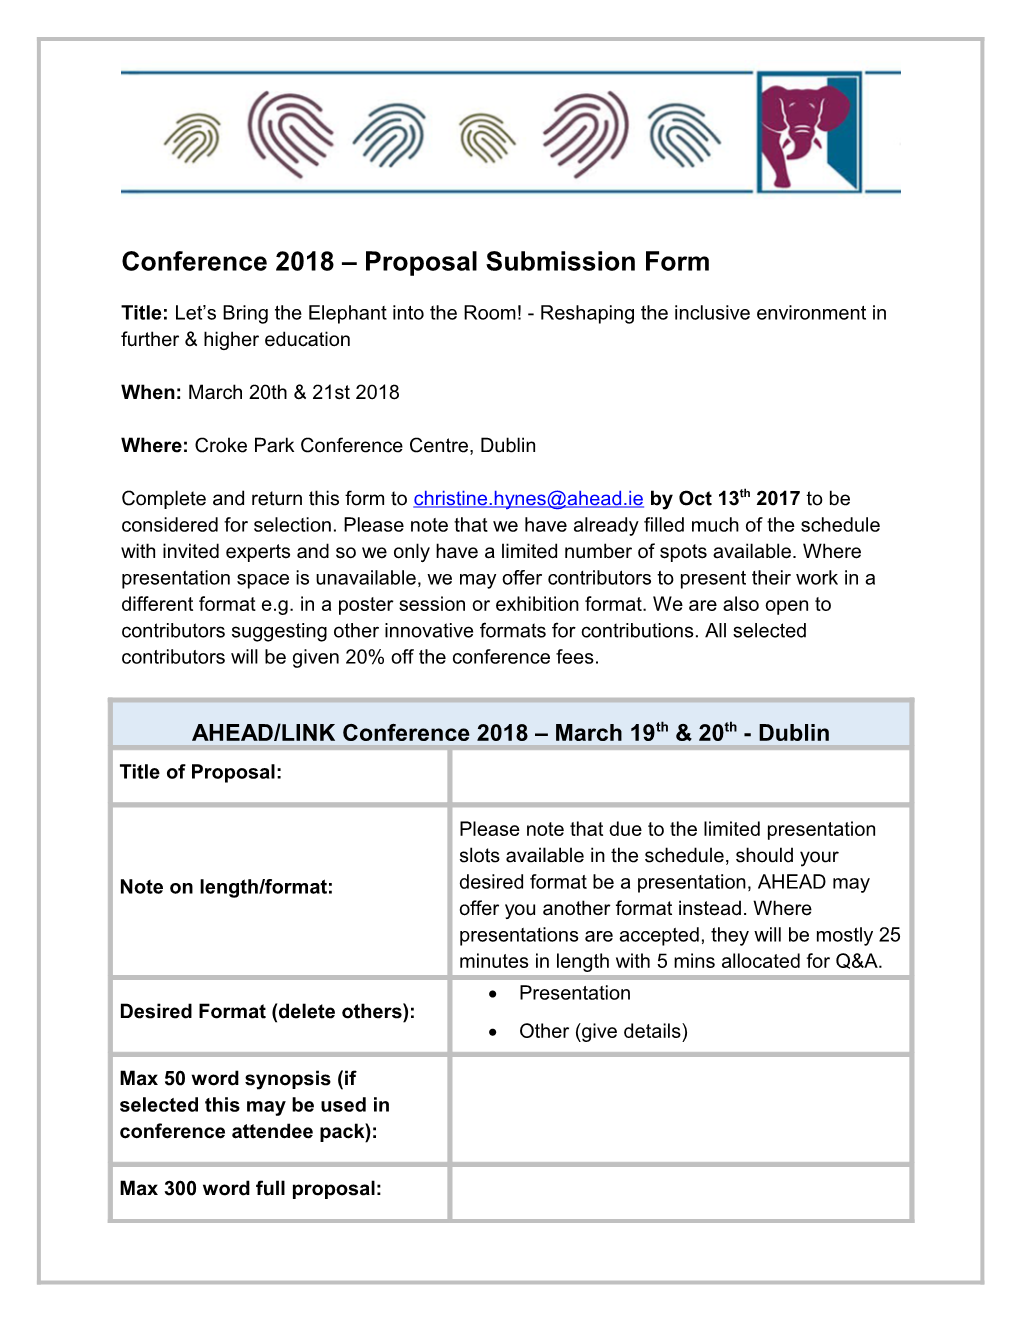 Conference 2018 Proposal Submission Form